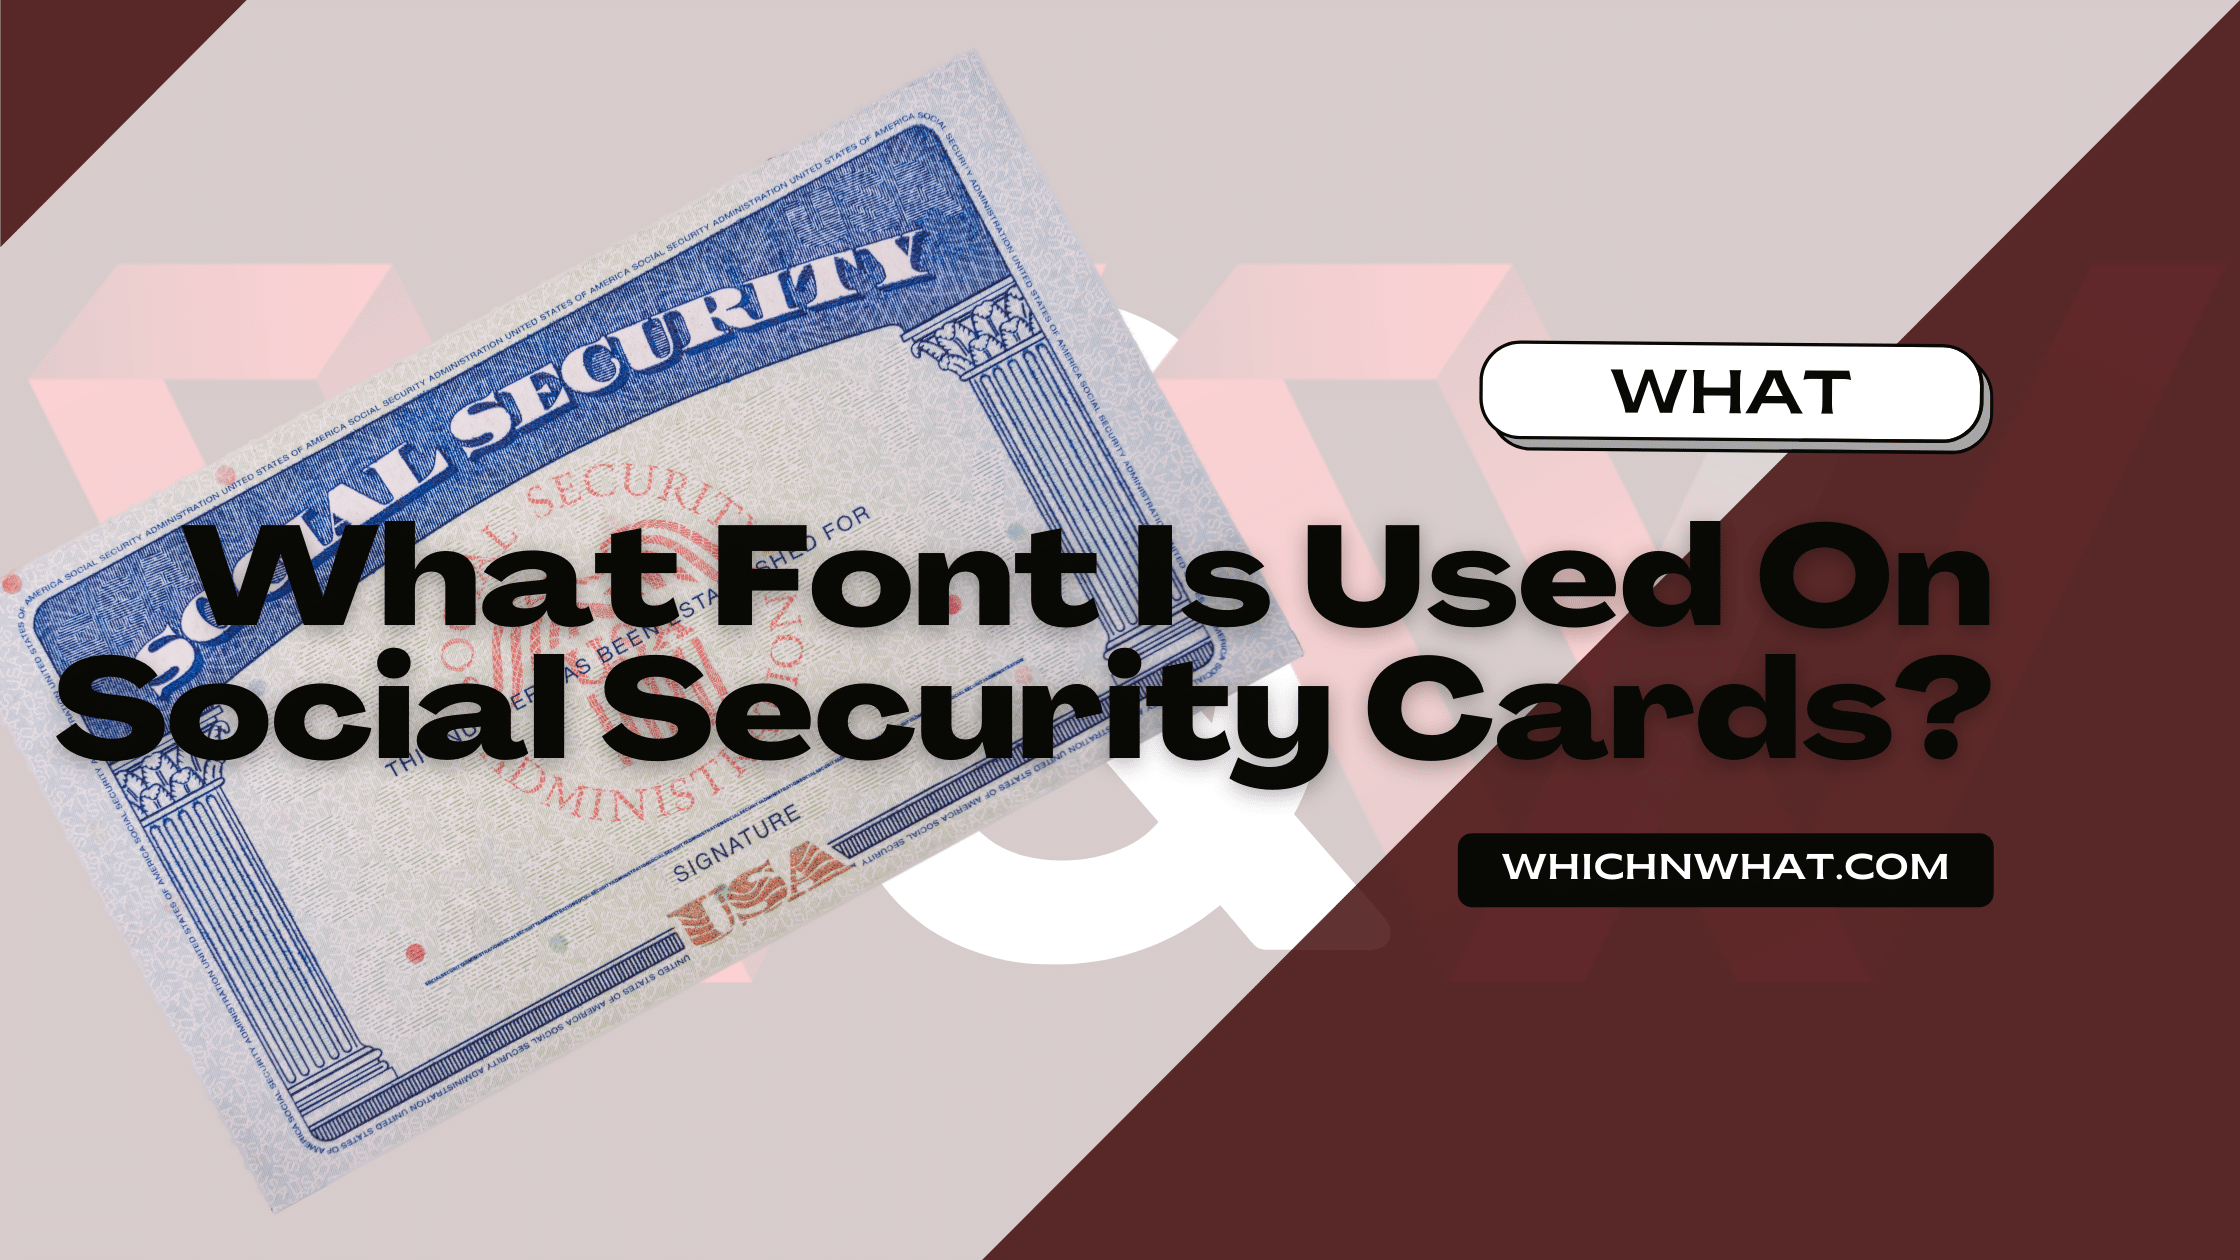 faqs-what-font-is-used-on-social-security-cards-which-what